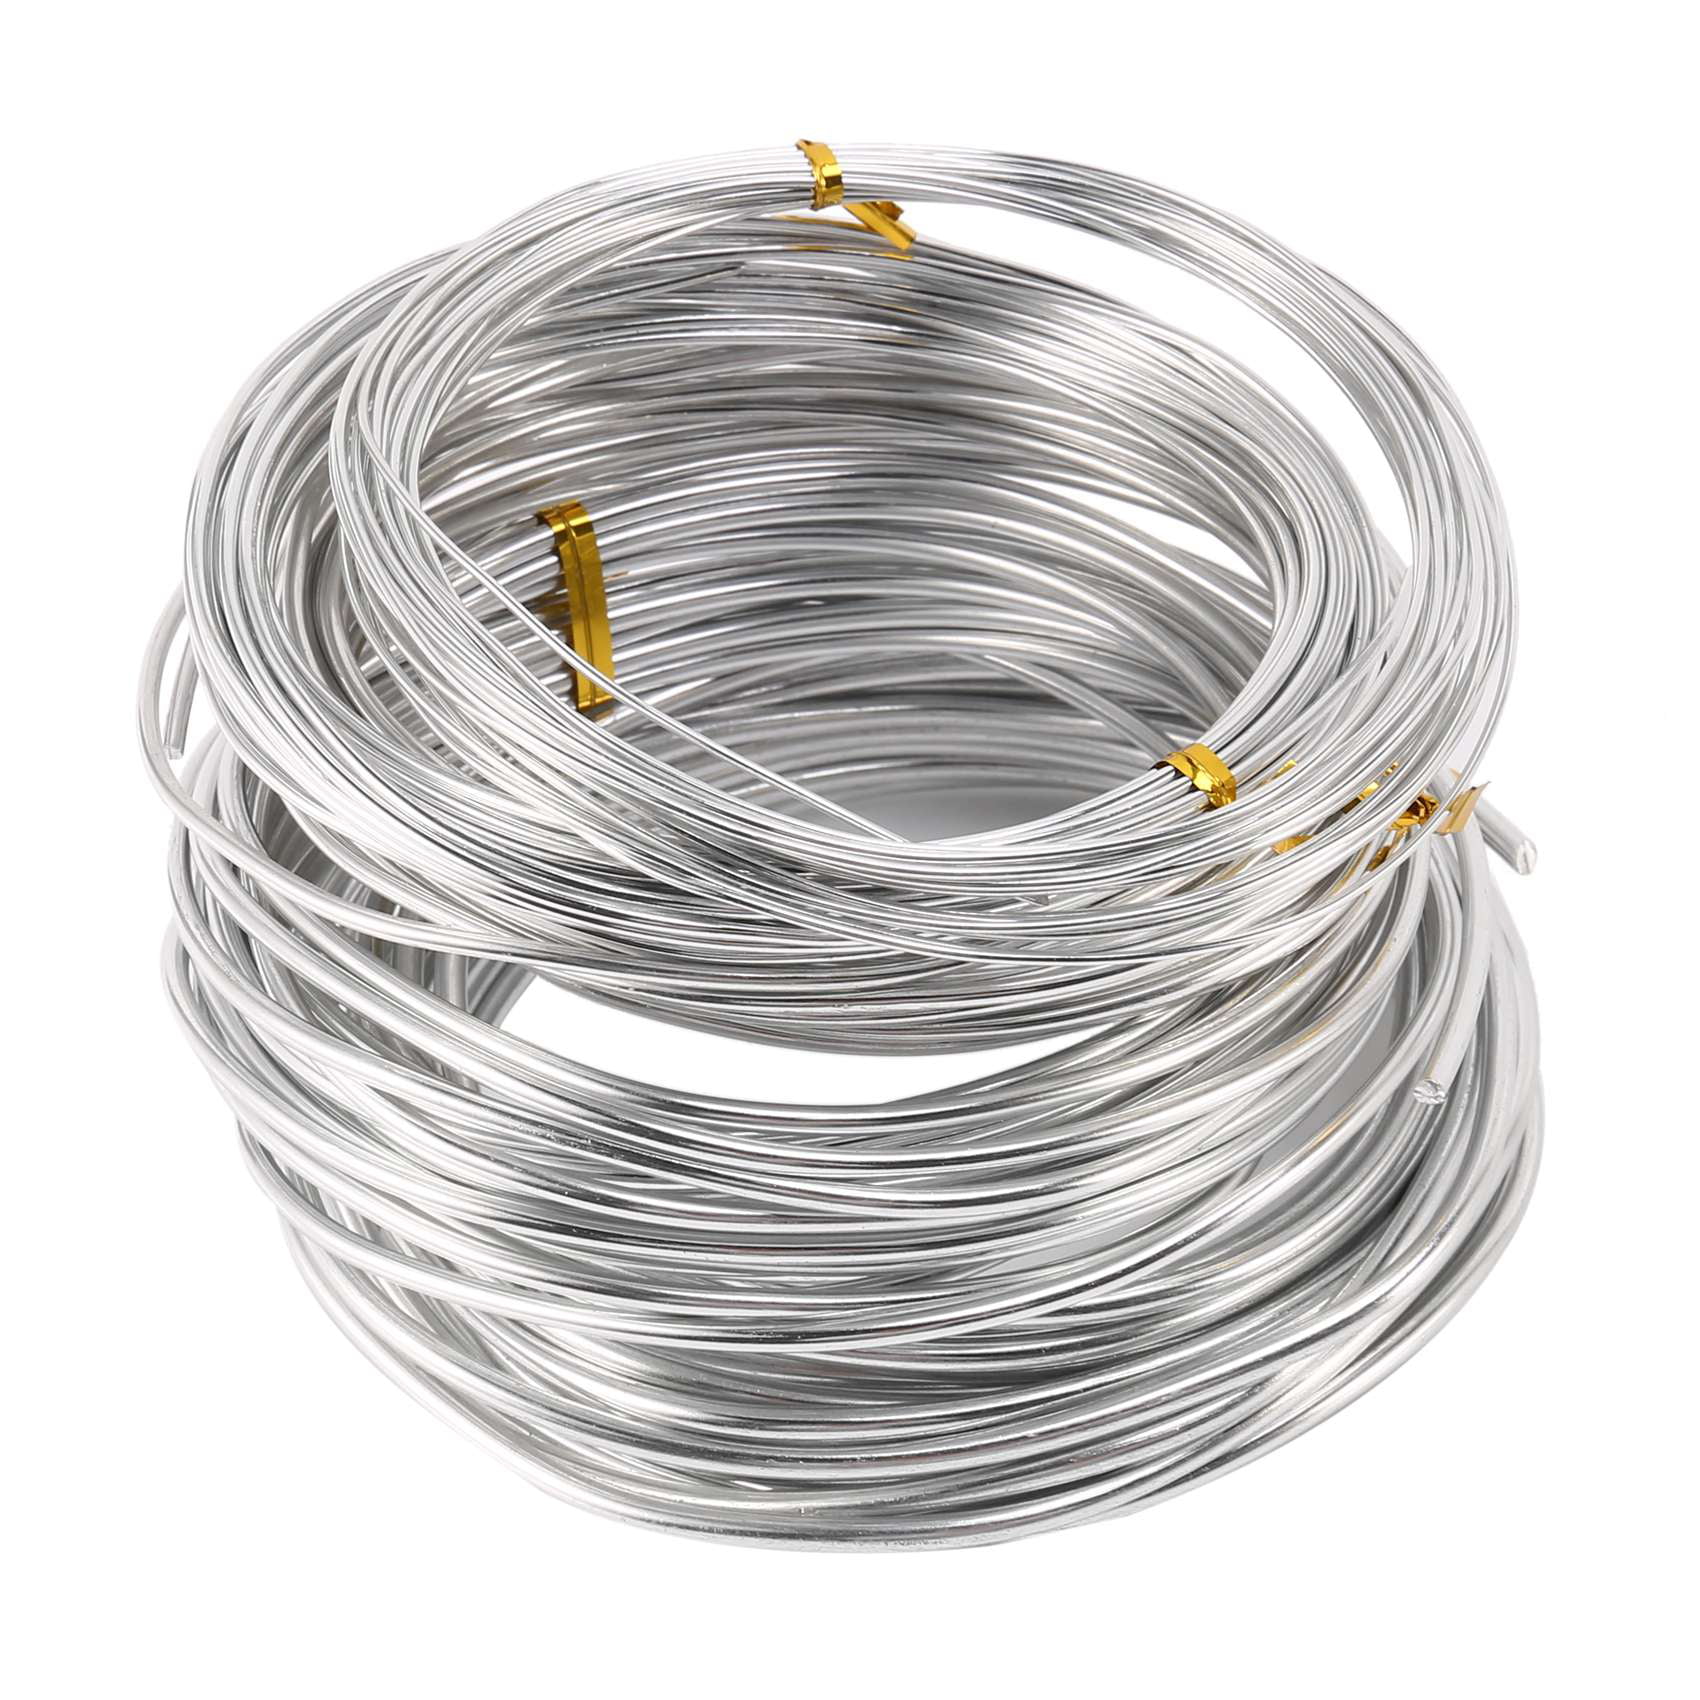 Dasing Silver Aluminum Craft Wire 1 mm 1.5 mm 2 mm 2.5 mm and 3 mm in Thickness Aluminum Wire Rolls for DIY Sculpture and Craft 